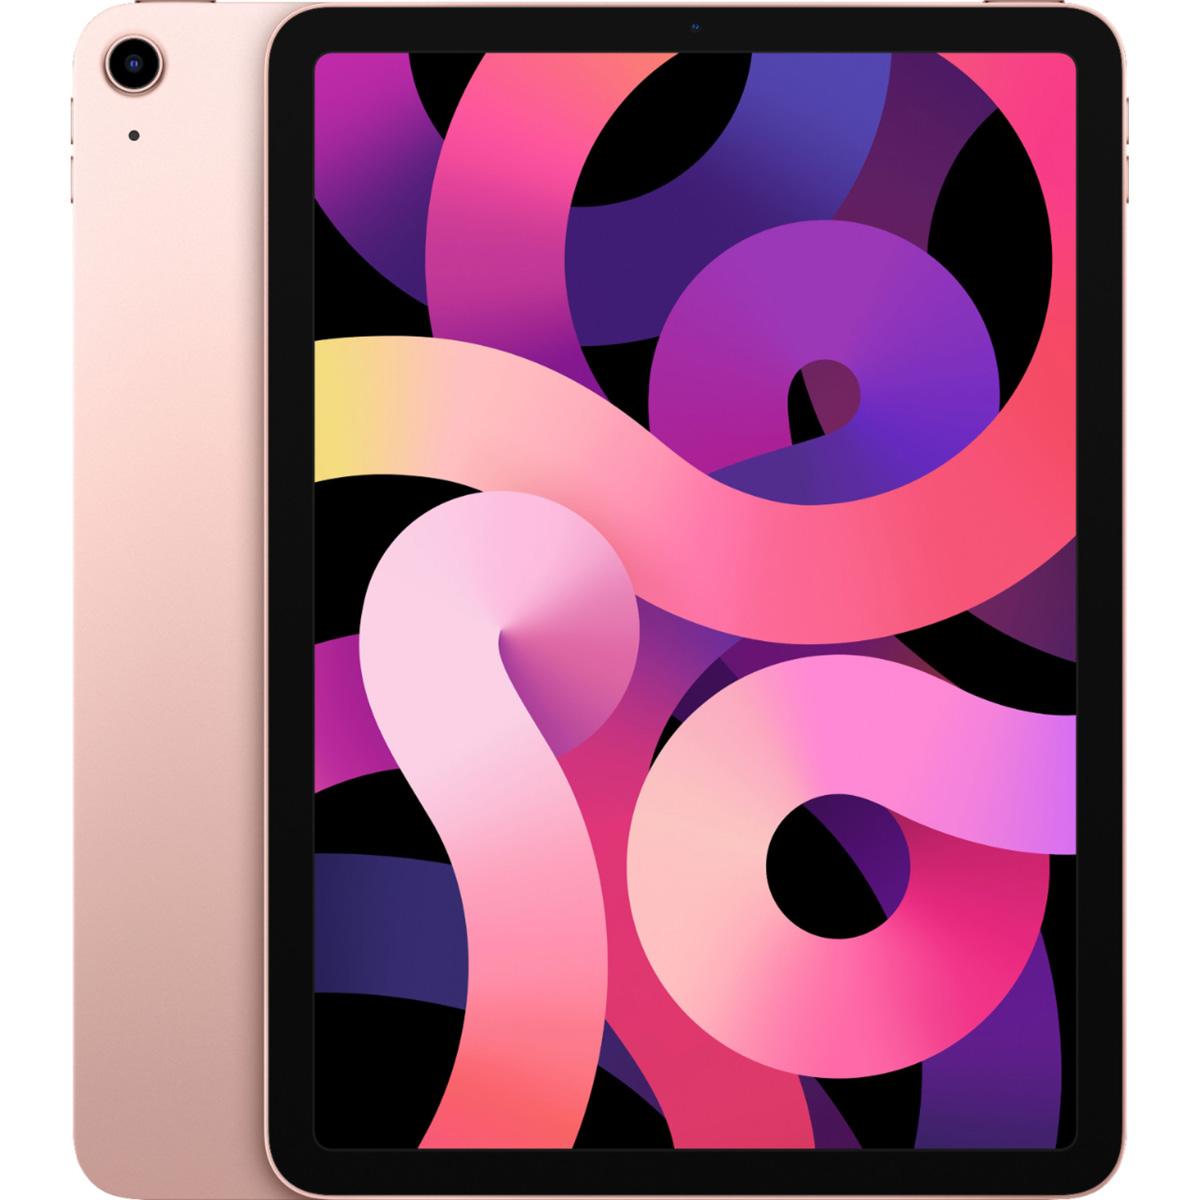 Apple 10.9in iPad Air 4th Gen 64GB Wi-Fi Tablet for $499.99 Shipped